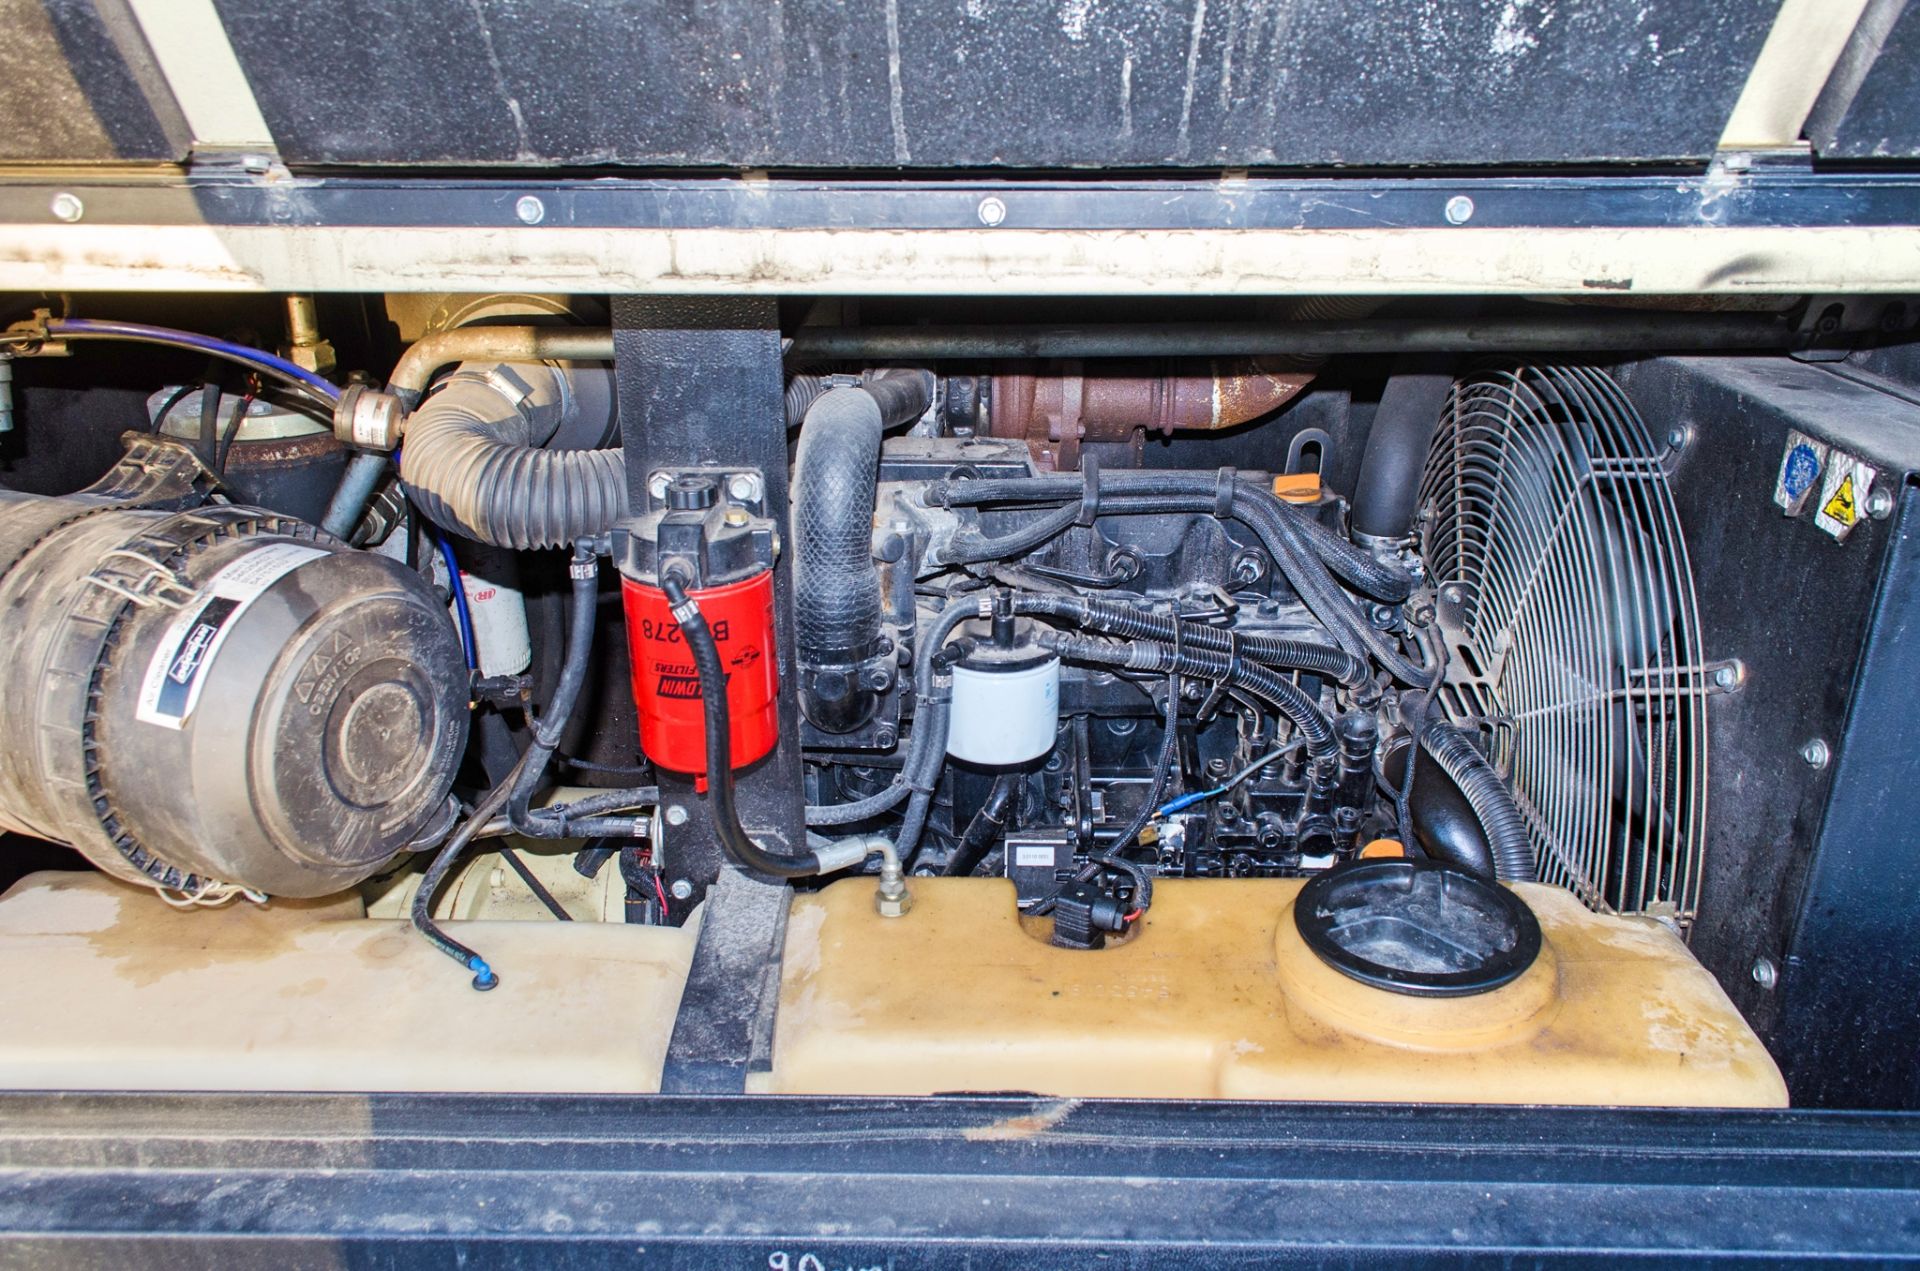 Doosan 7/71 diesel driven fast tow mobile air compressor Year: 2013 S/N: 523329 Recorded Hours: 2458 - Image 5 of 5